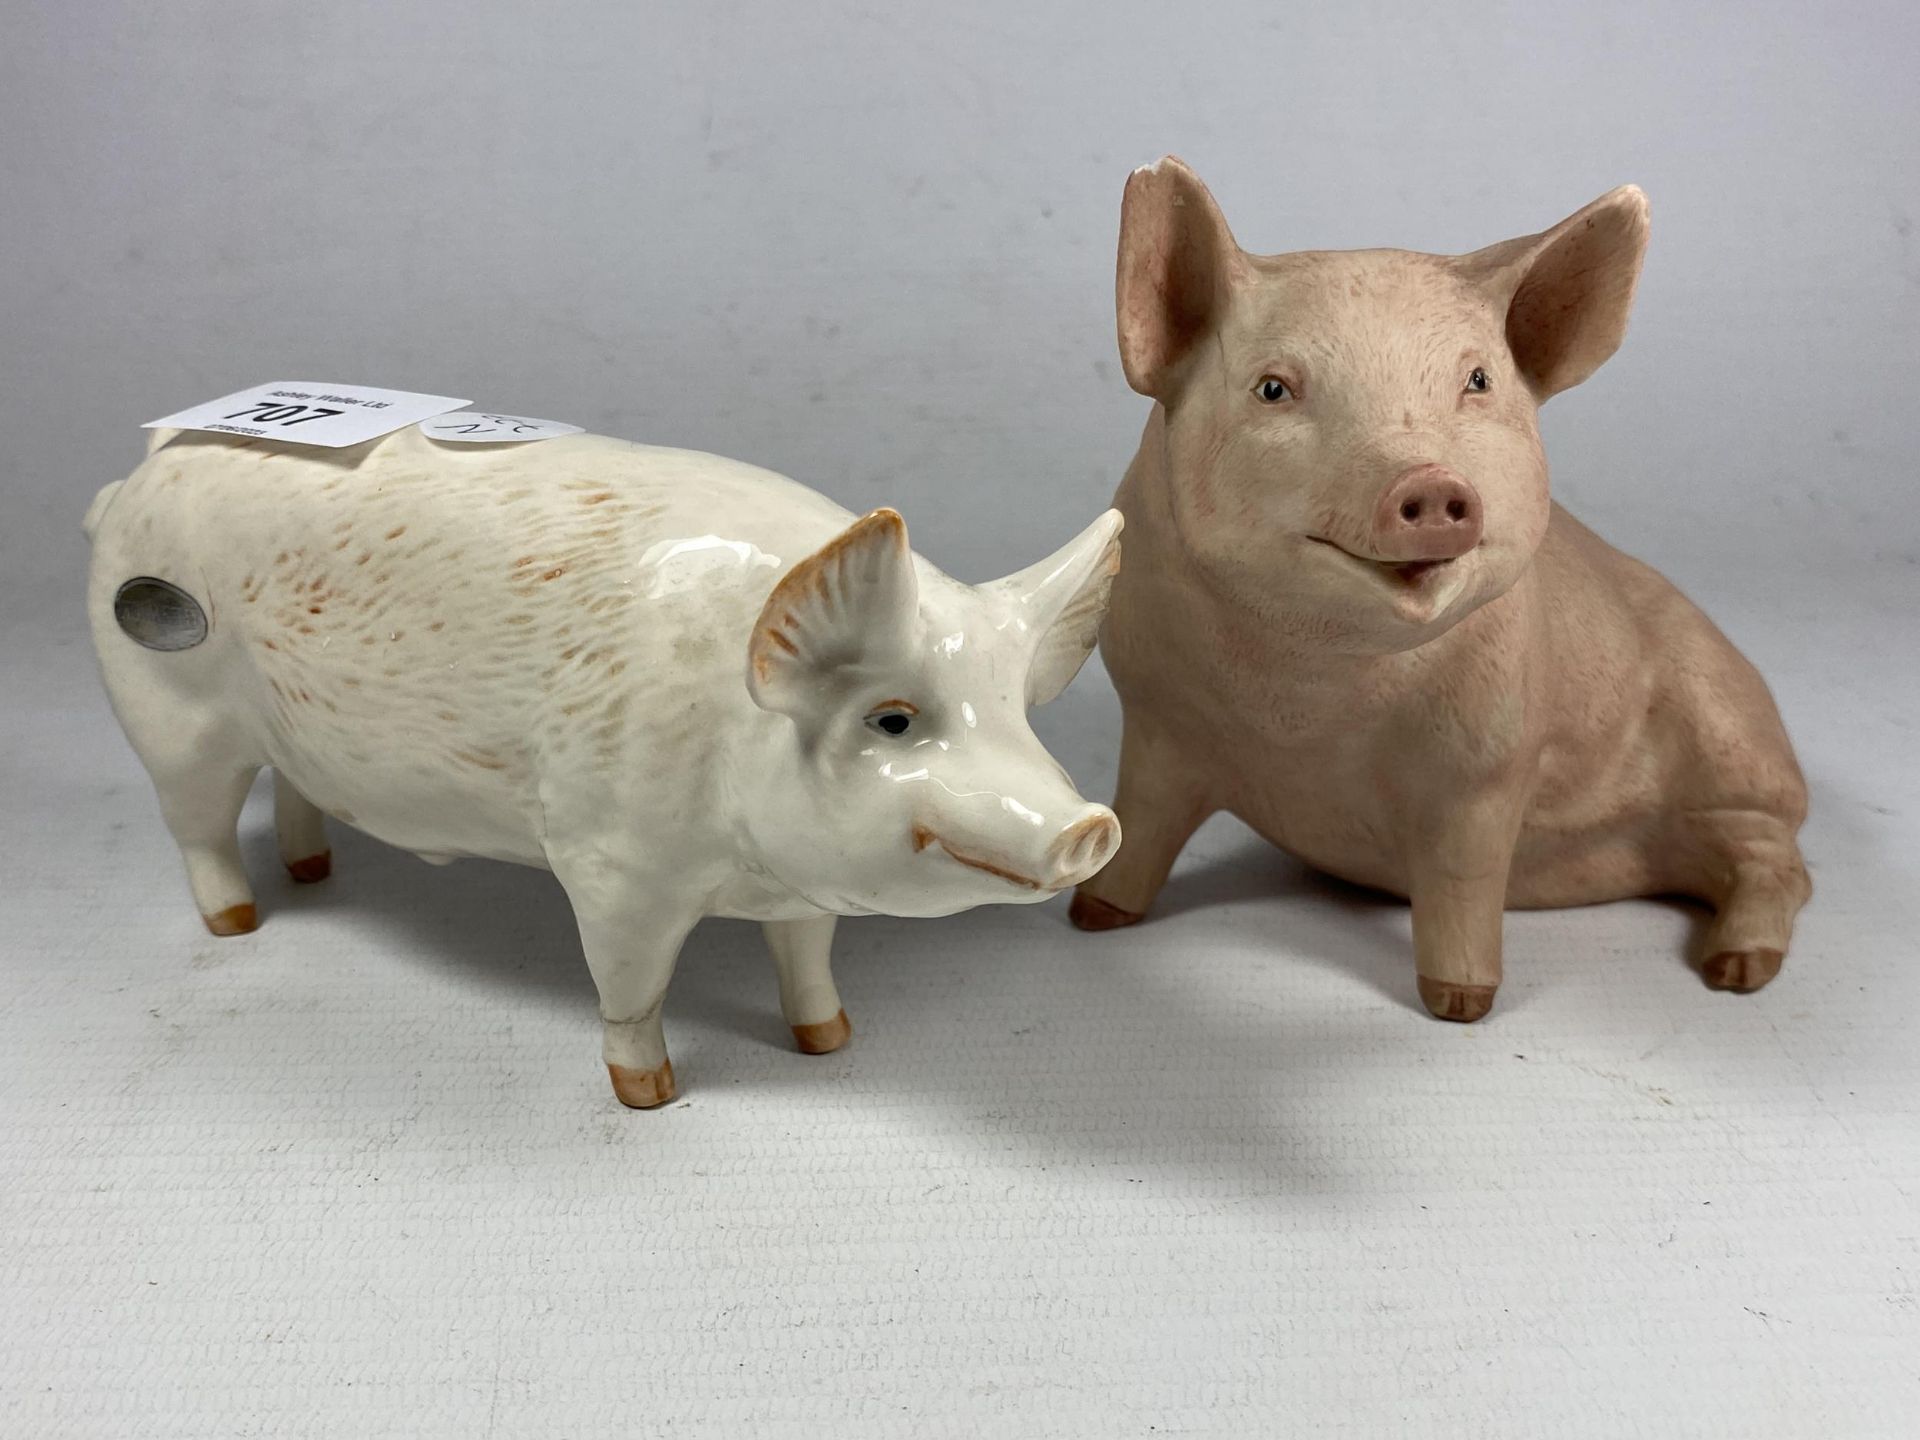 TWO CERAMIC PIGS - A BESWICK CH WALL CHAMPION BOY 53 AND AN AYNSLEY 'PIGGY' (CHIP TO EAR)